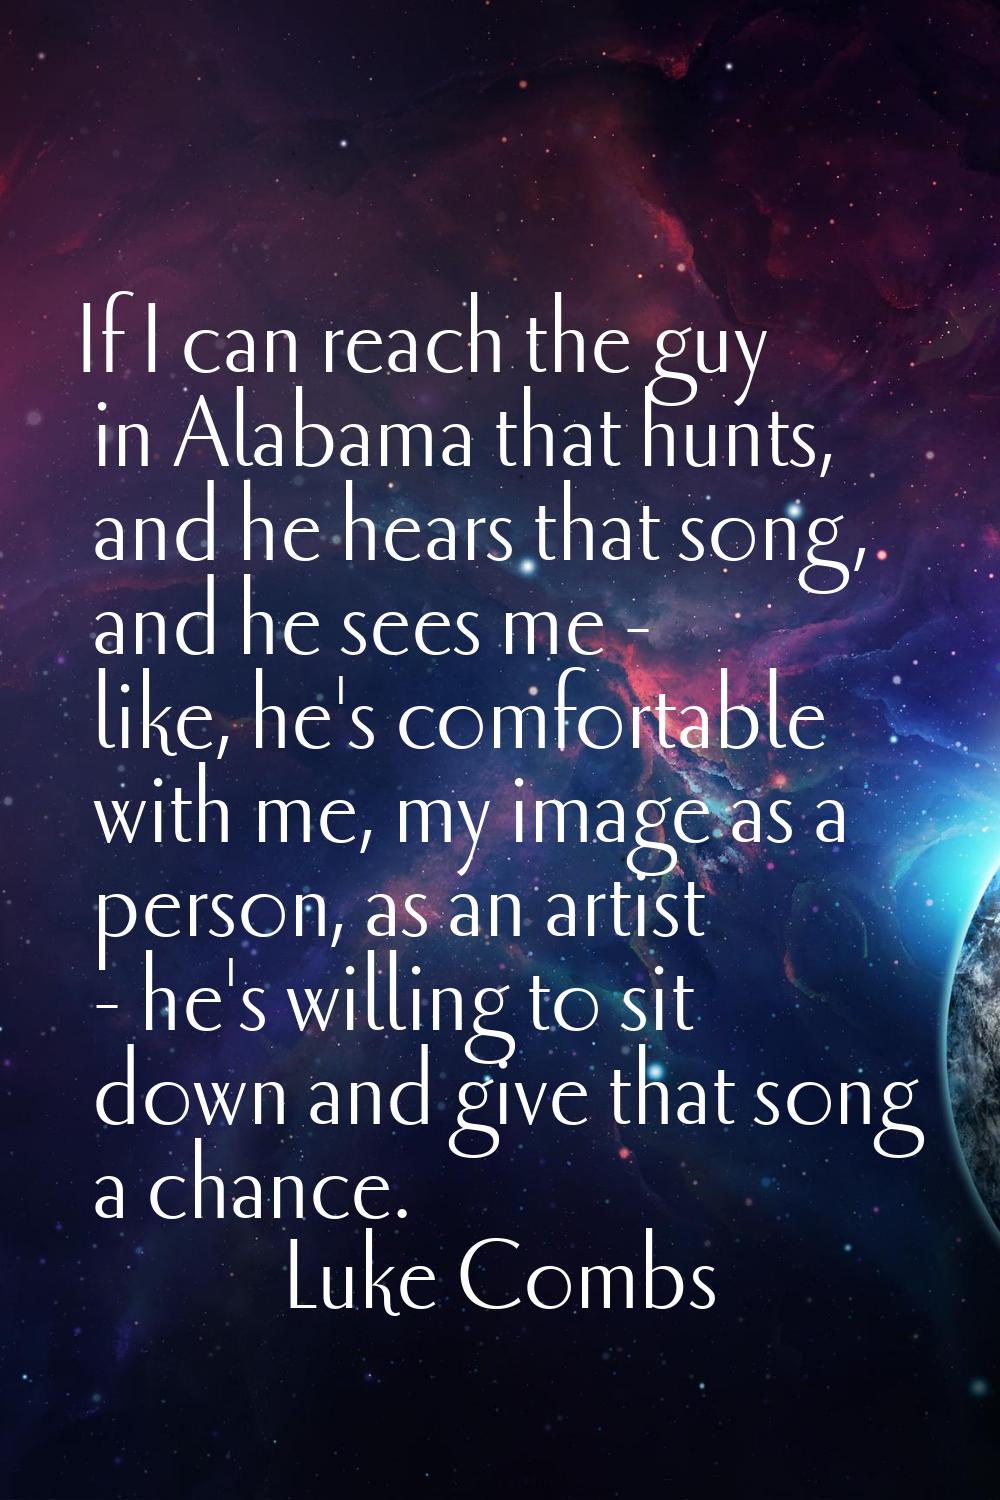 If I can reach the guy in Alabama that hunts, and he hears that song, and he sees me - like, he's c